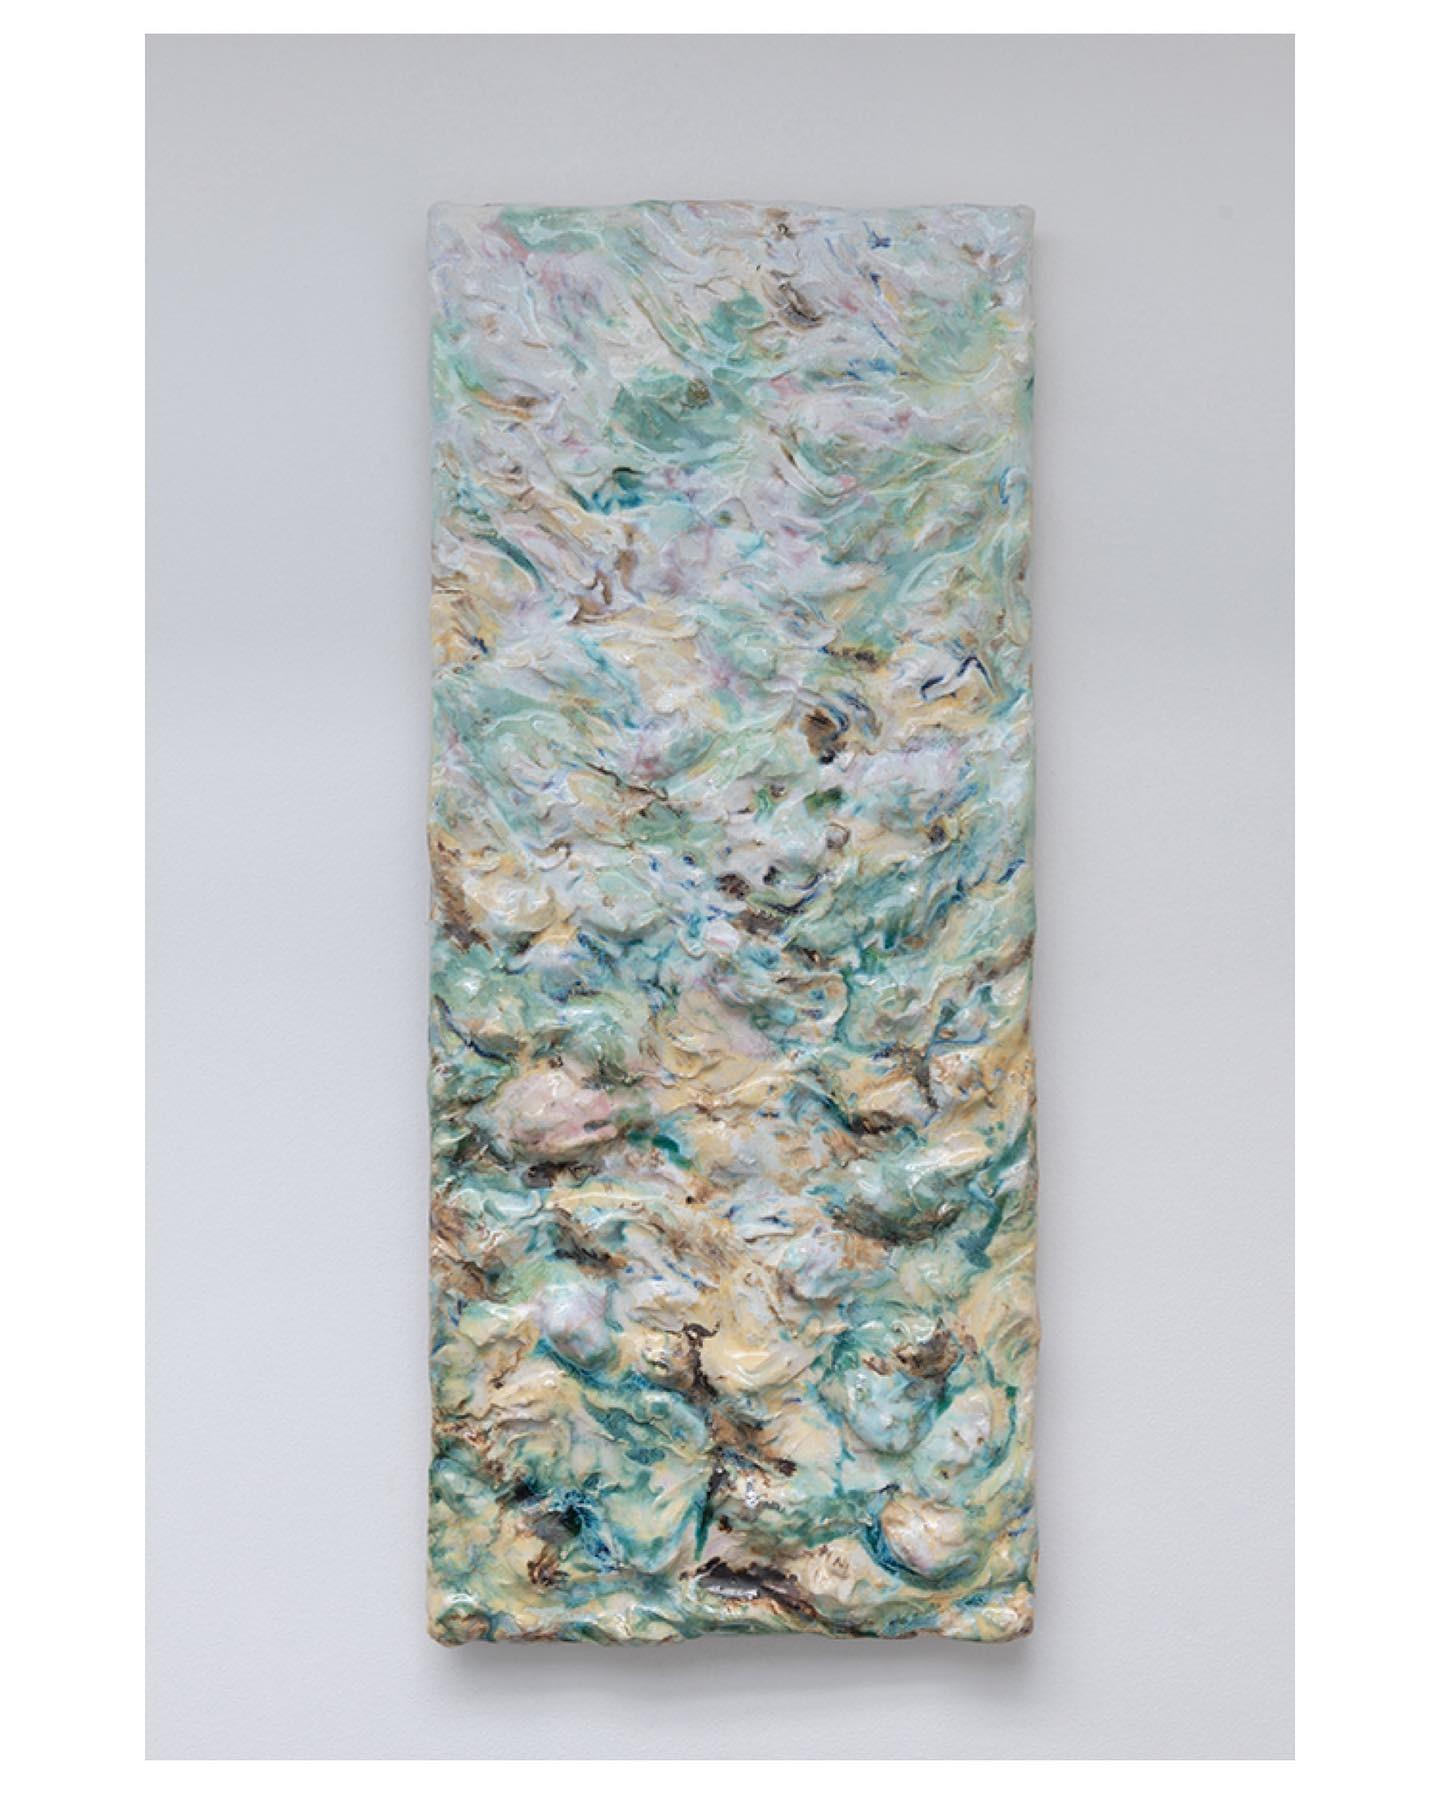 Revelate wall sculpture by Natasja Alers, 2021
Dimensions: 40 x 95 cm
Material: ceramics, glazes

Visual artist Natasja Alers (The Hague, 1987) graduated from the Gerrit Rietveld Academy in the field of ceramics. Alers makes casts of human body